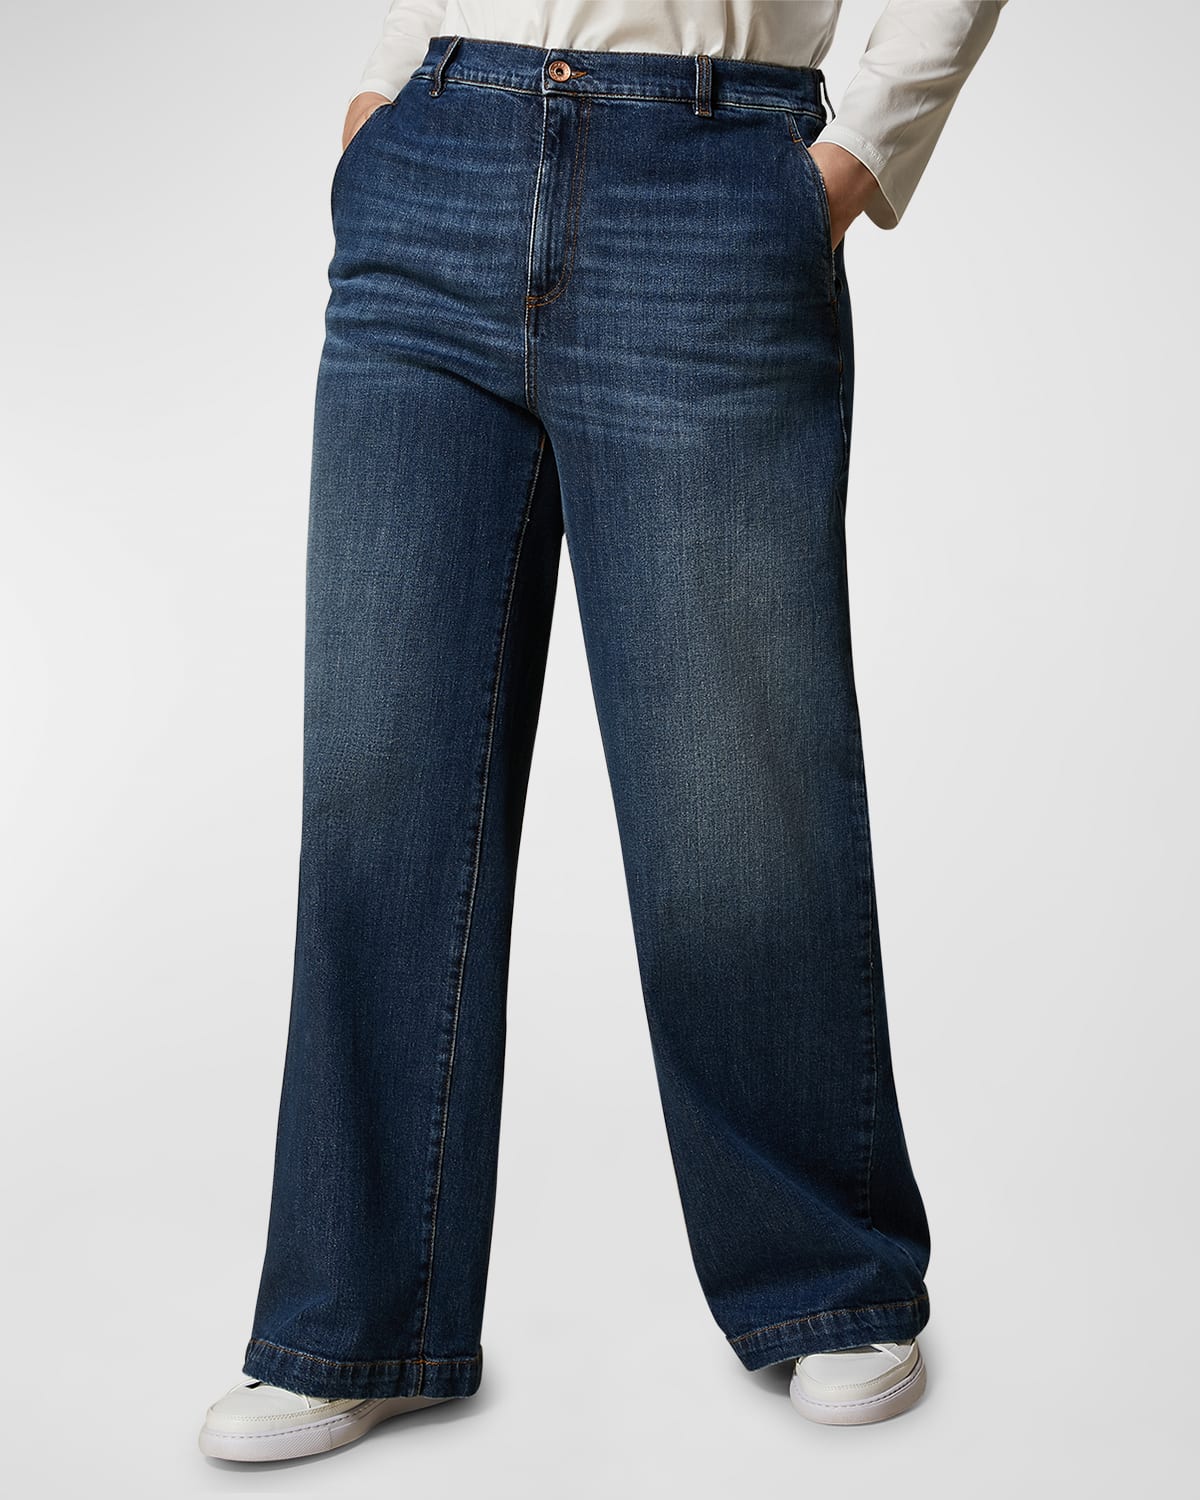 Plus Size Holly High-Rise Denim Jeans